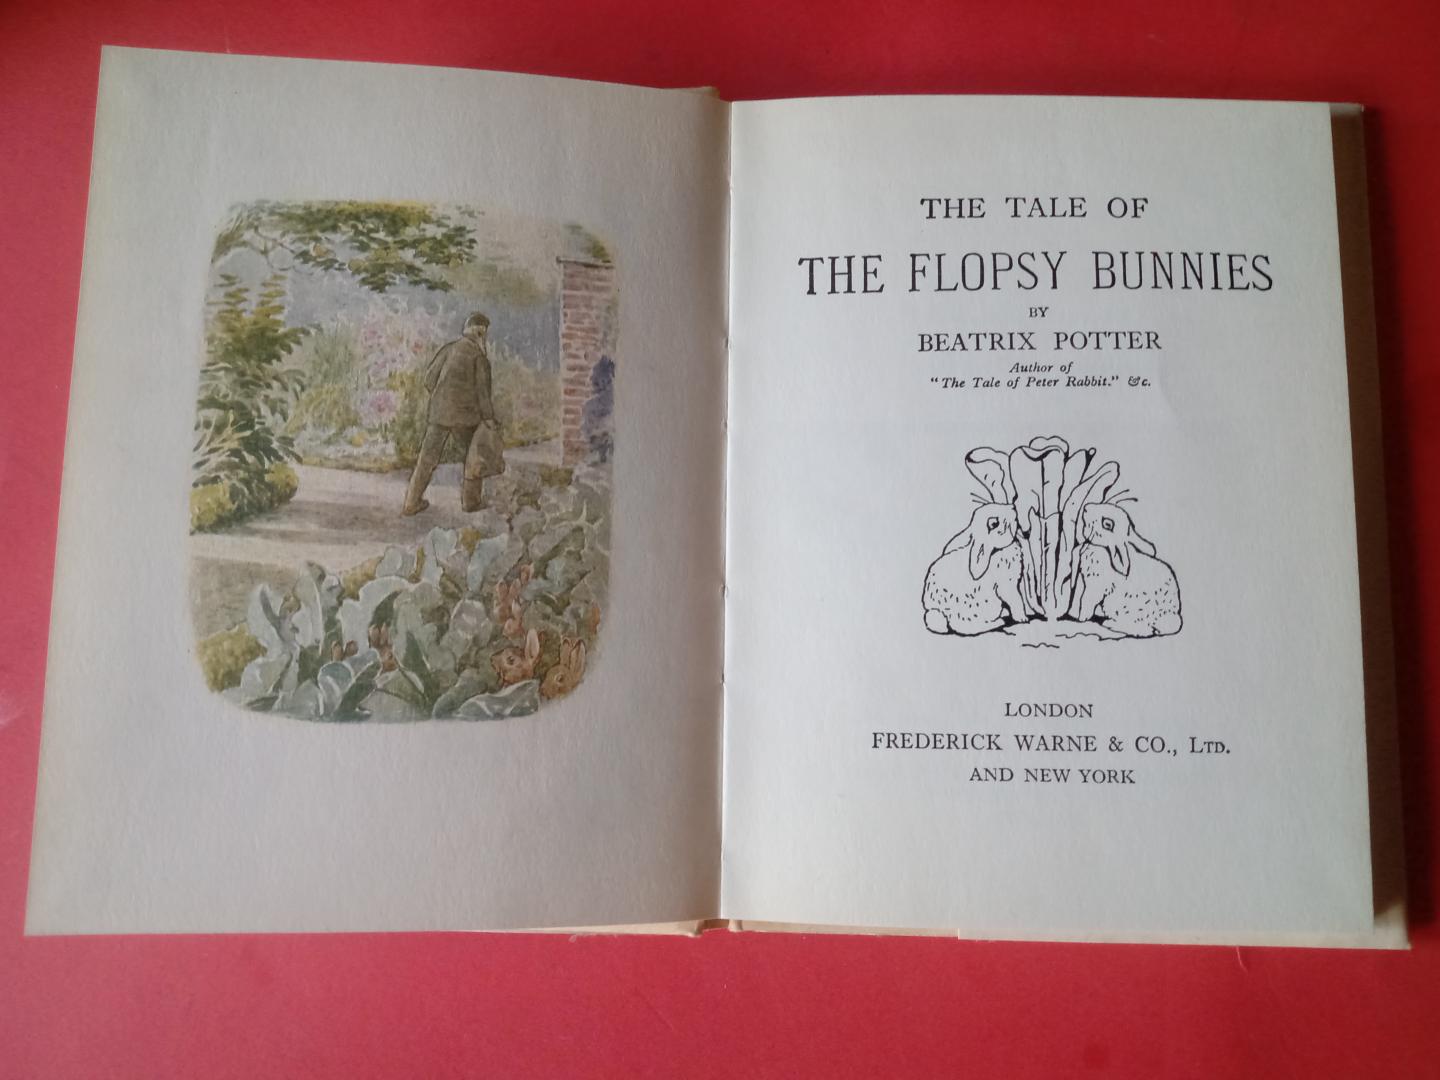 Beatrix Potter, ( nr 10 ) - The Tale of the Flopsy Bunnies